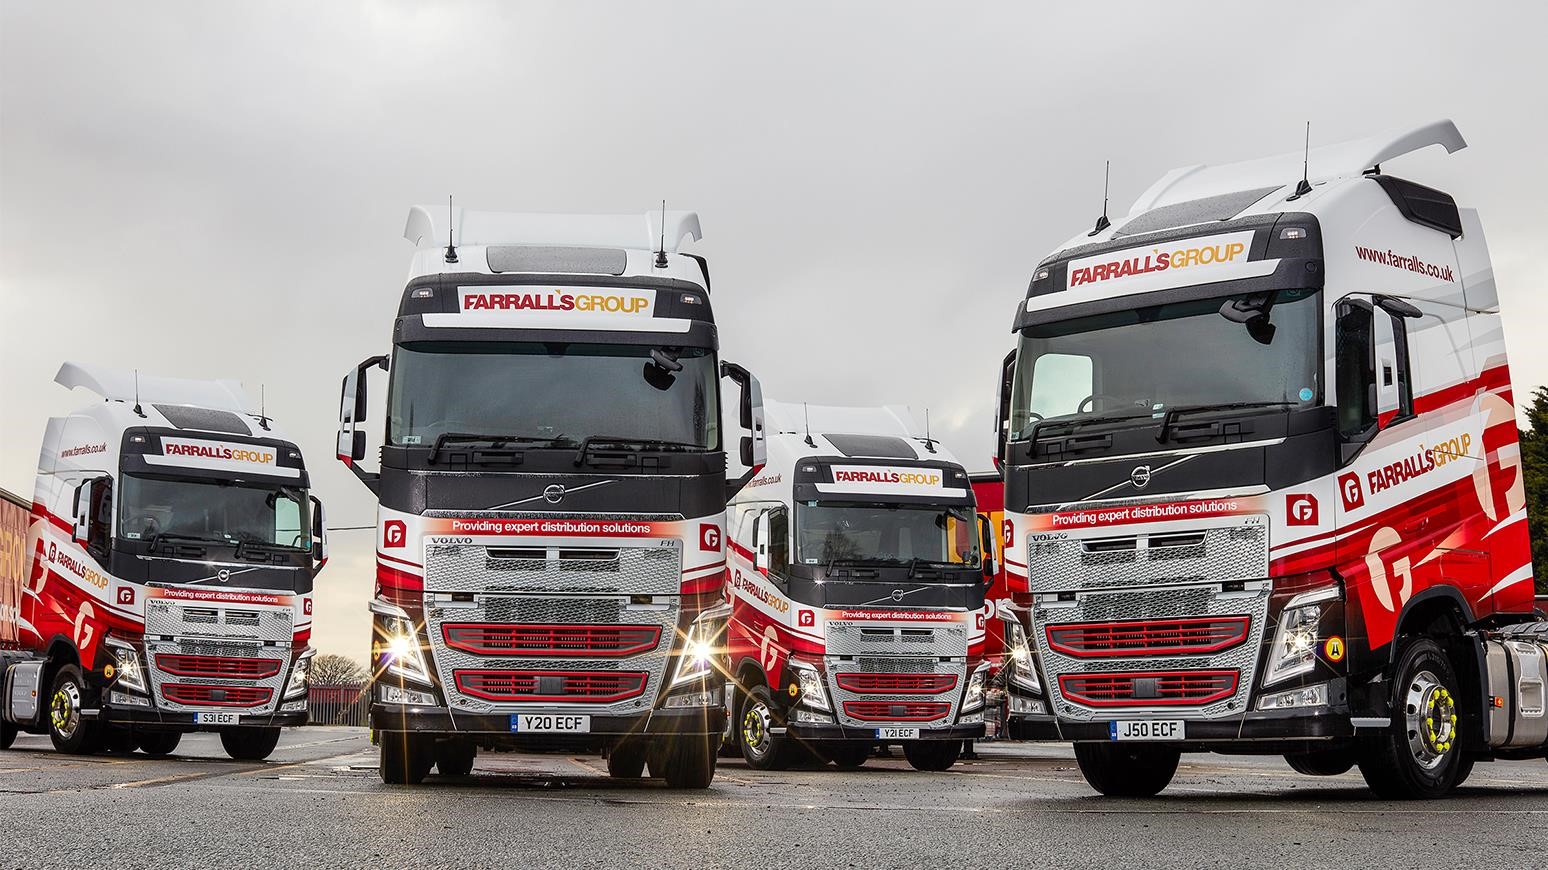 Chester-Based Farrall’s Group Adds Four New Volvo FH Tractor Units To Meet Increased Demand